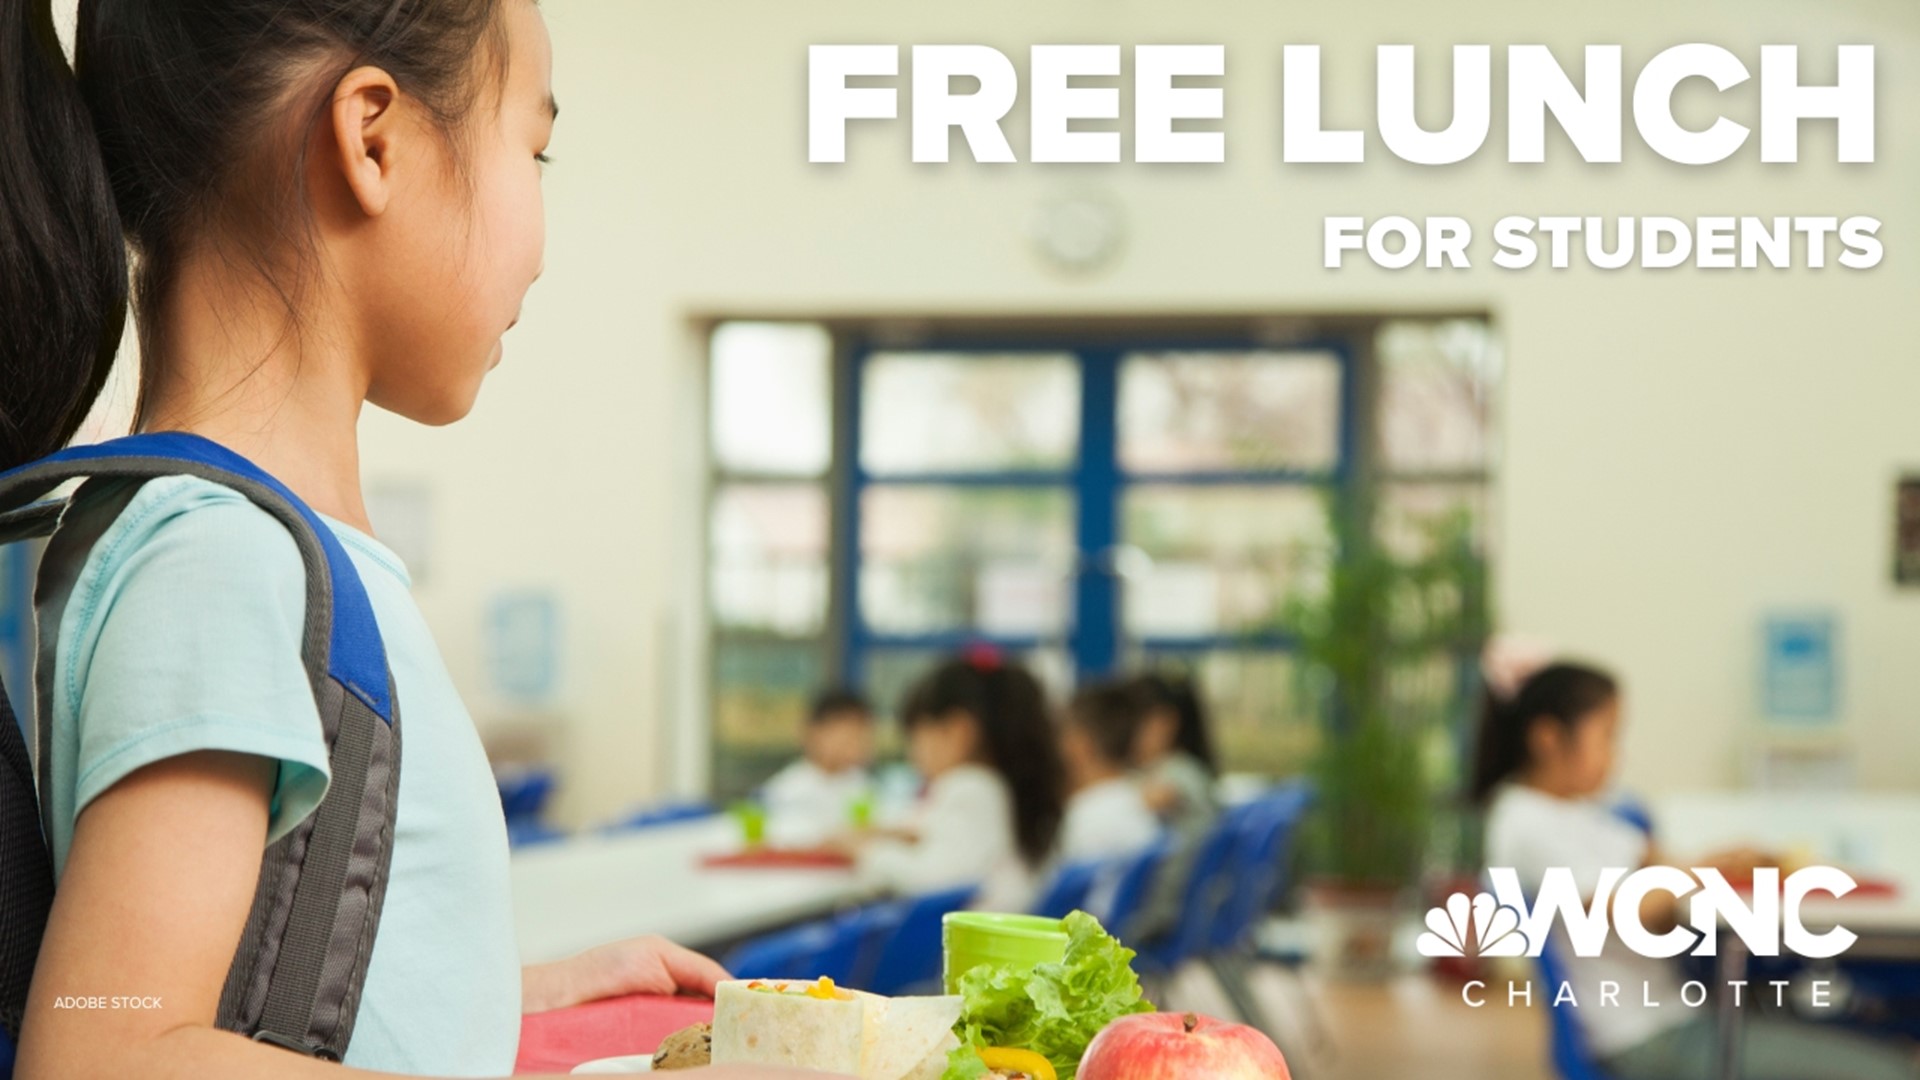 Free meals are a critical part of the day for some students.